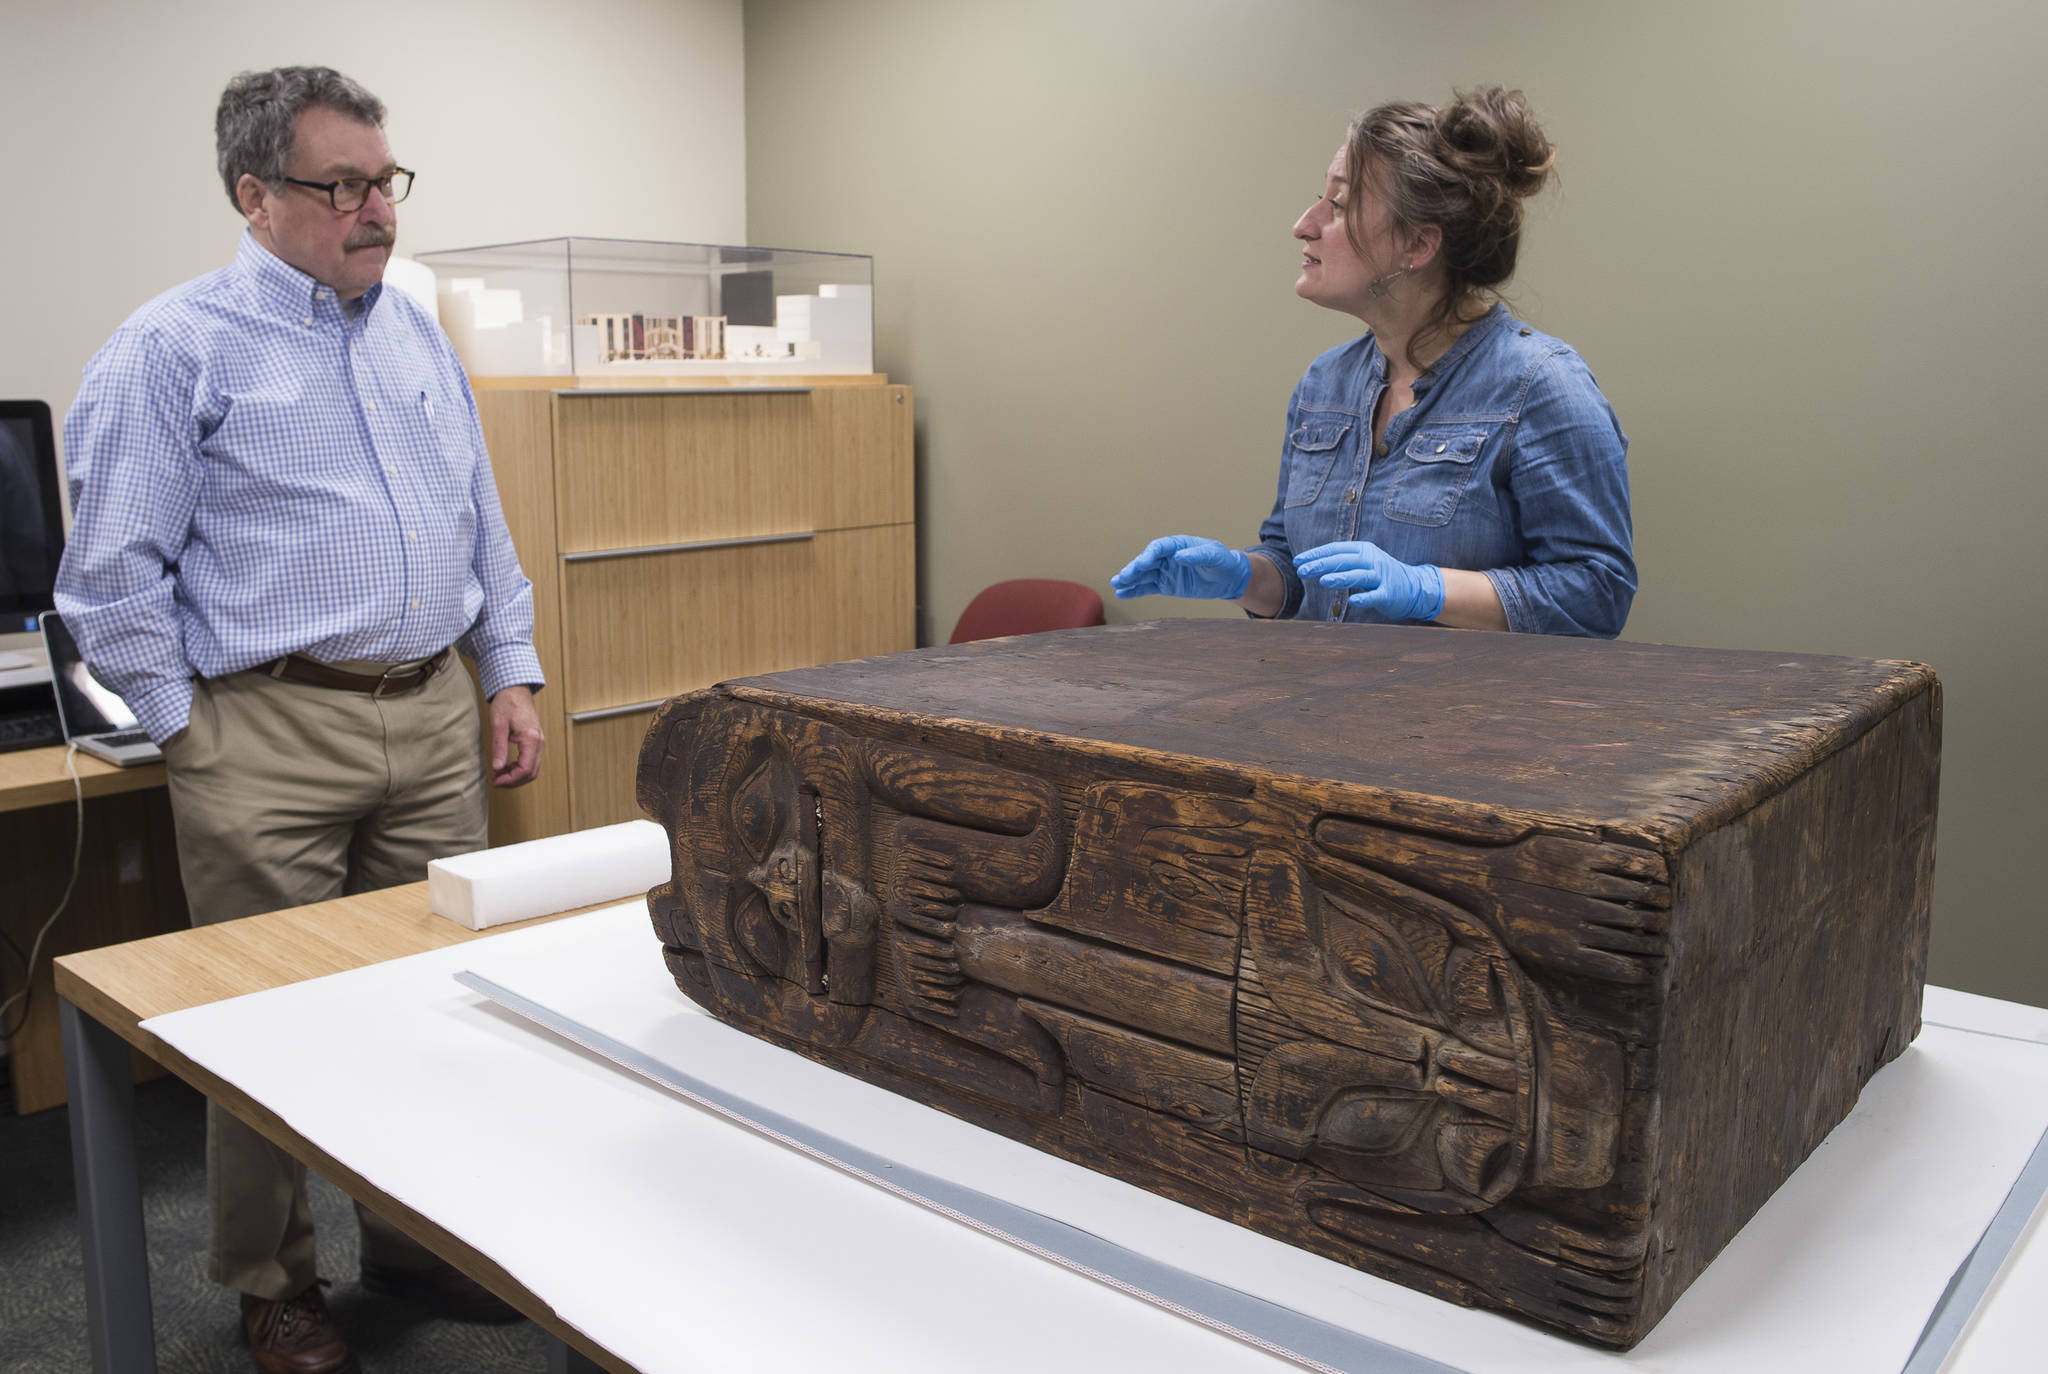 Chuck Smythe, Ph.D. History and Culture Director for Sealaska Heritage Institute, and Nicole Peters, an arts conservator from Skagway, talk about a wooden box drum that is currently undergoing restoration at SHI on Wednesday, Oct. 18, 2017. (Michael Penn | Capital City Weekly)